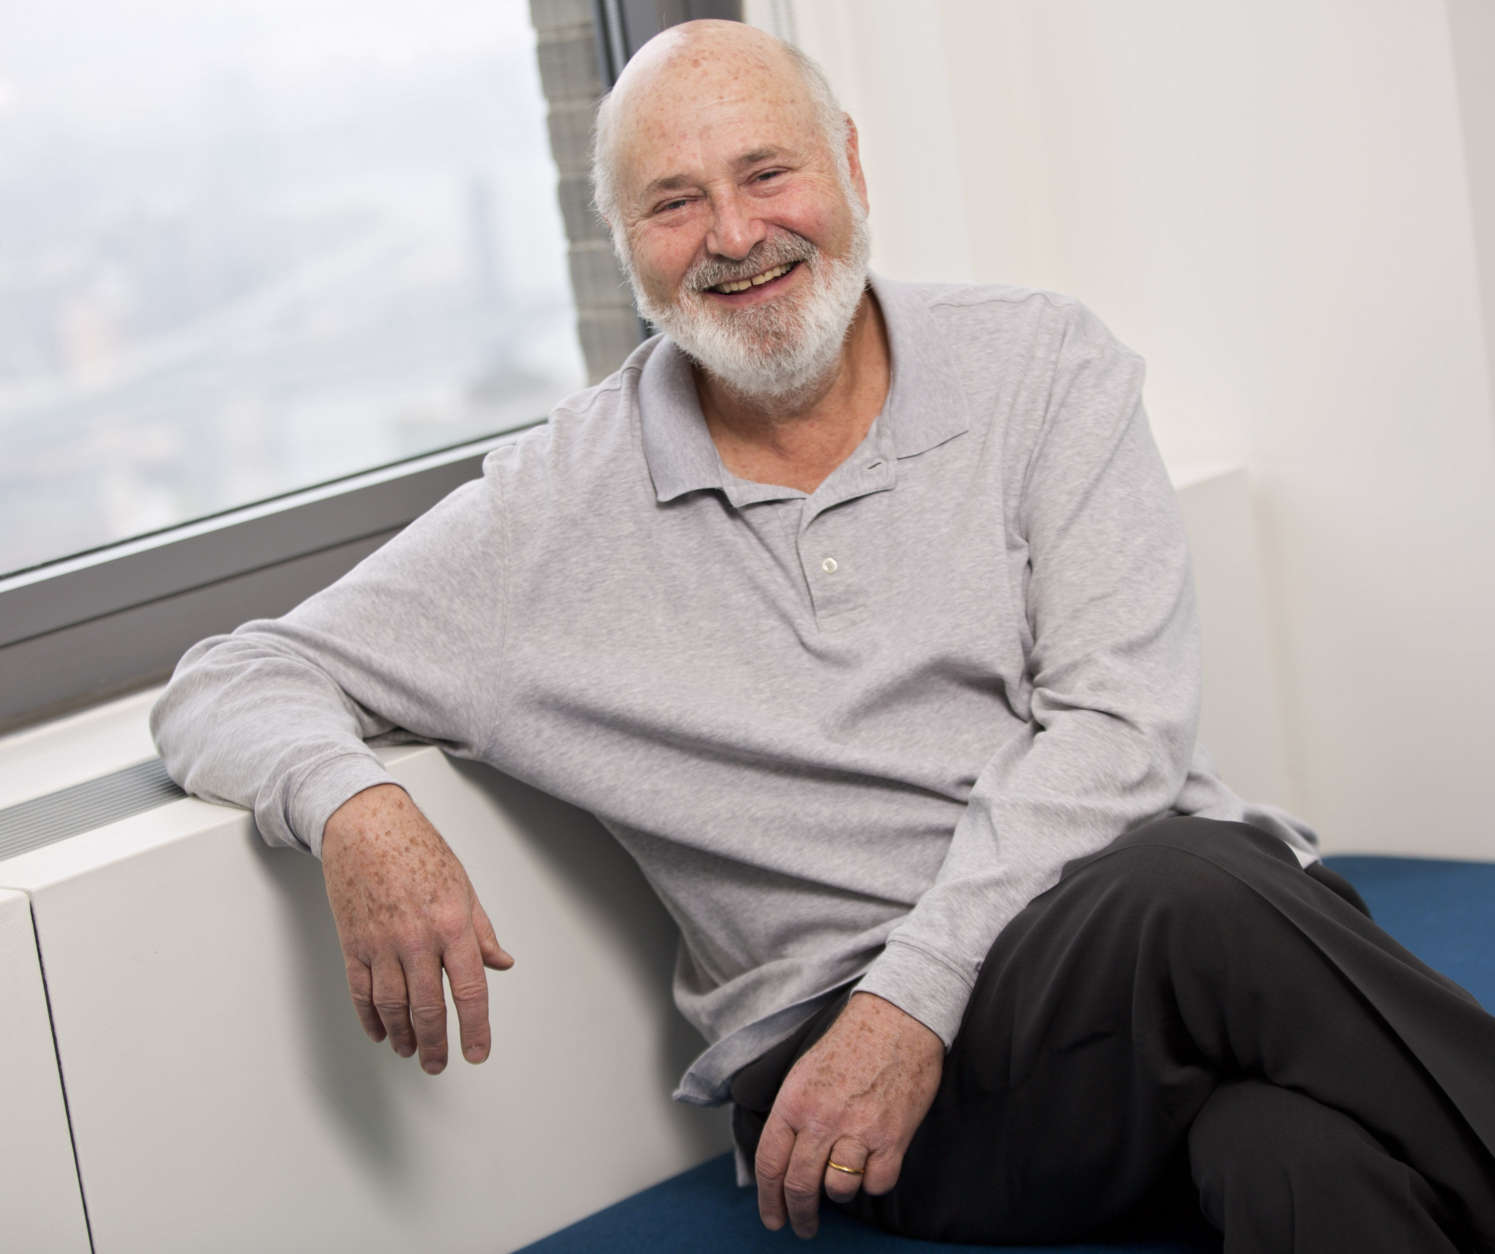 In this May 2, 2016 photo, writer-director Rob Reiner poses for a portrait in New York. Reiner has always had an affinity for the father-son story and has explored the theme and his own life in films like "Stand By Me" and "A Few Good Men," but none have come so close as "Being Charlie," loosely based on his son Nick Reiner's struggles with drugs. (Photo by Brian Ach/Invision/AP)